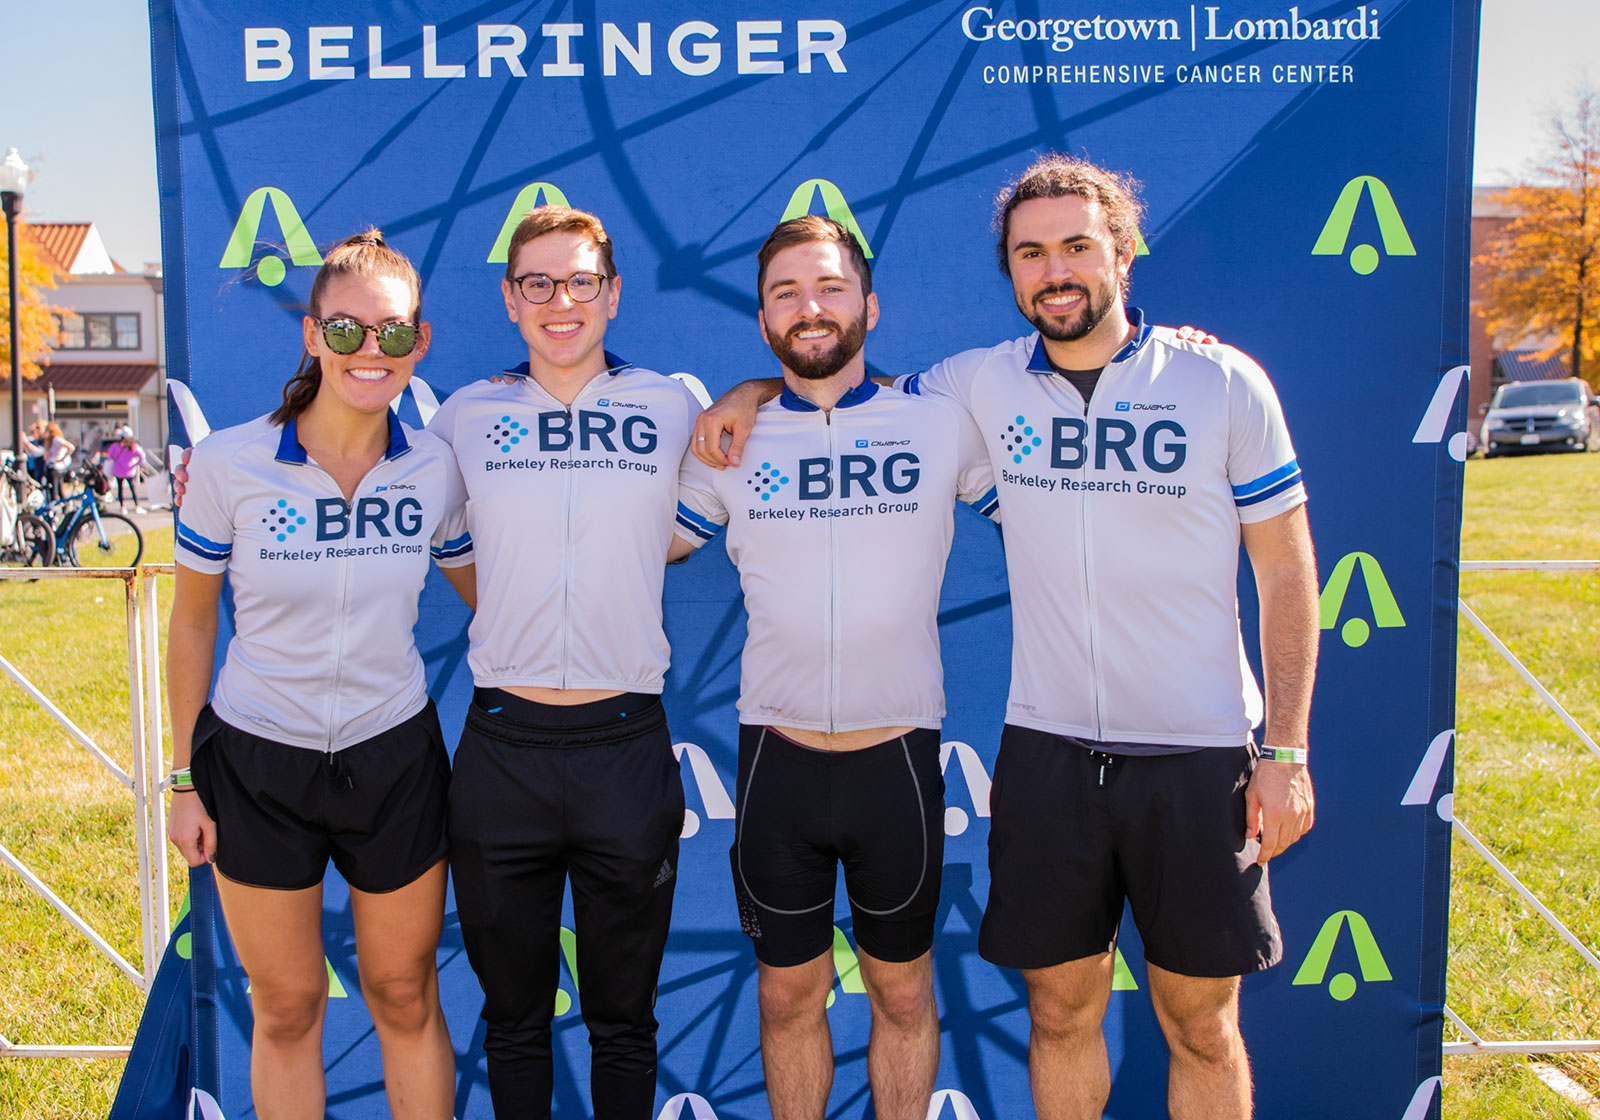 BellRinger riders in front of bell logo sign at 50/100 mile finish in Urbana, MD